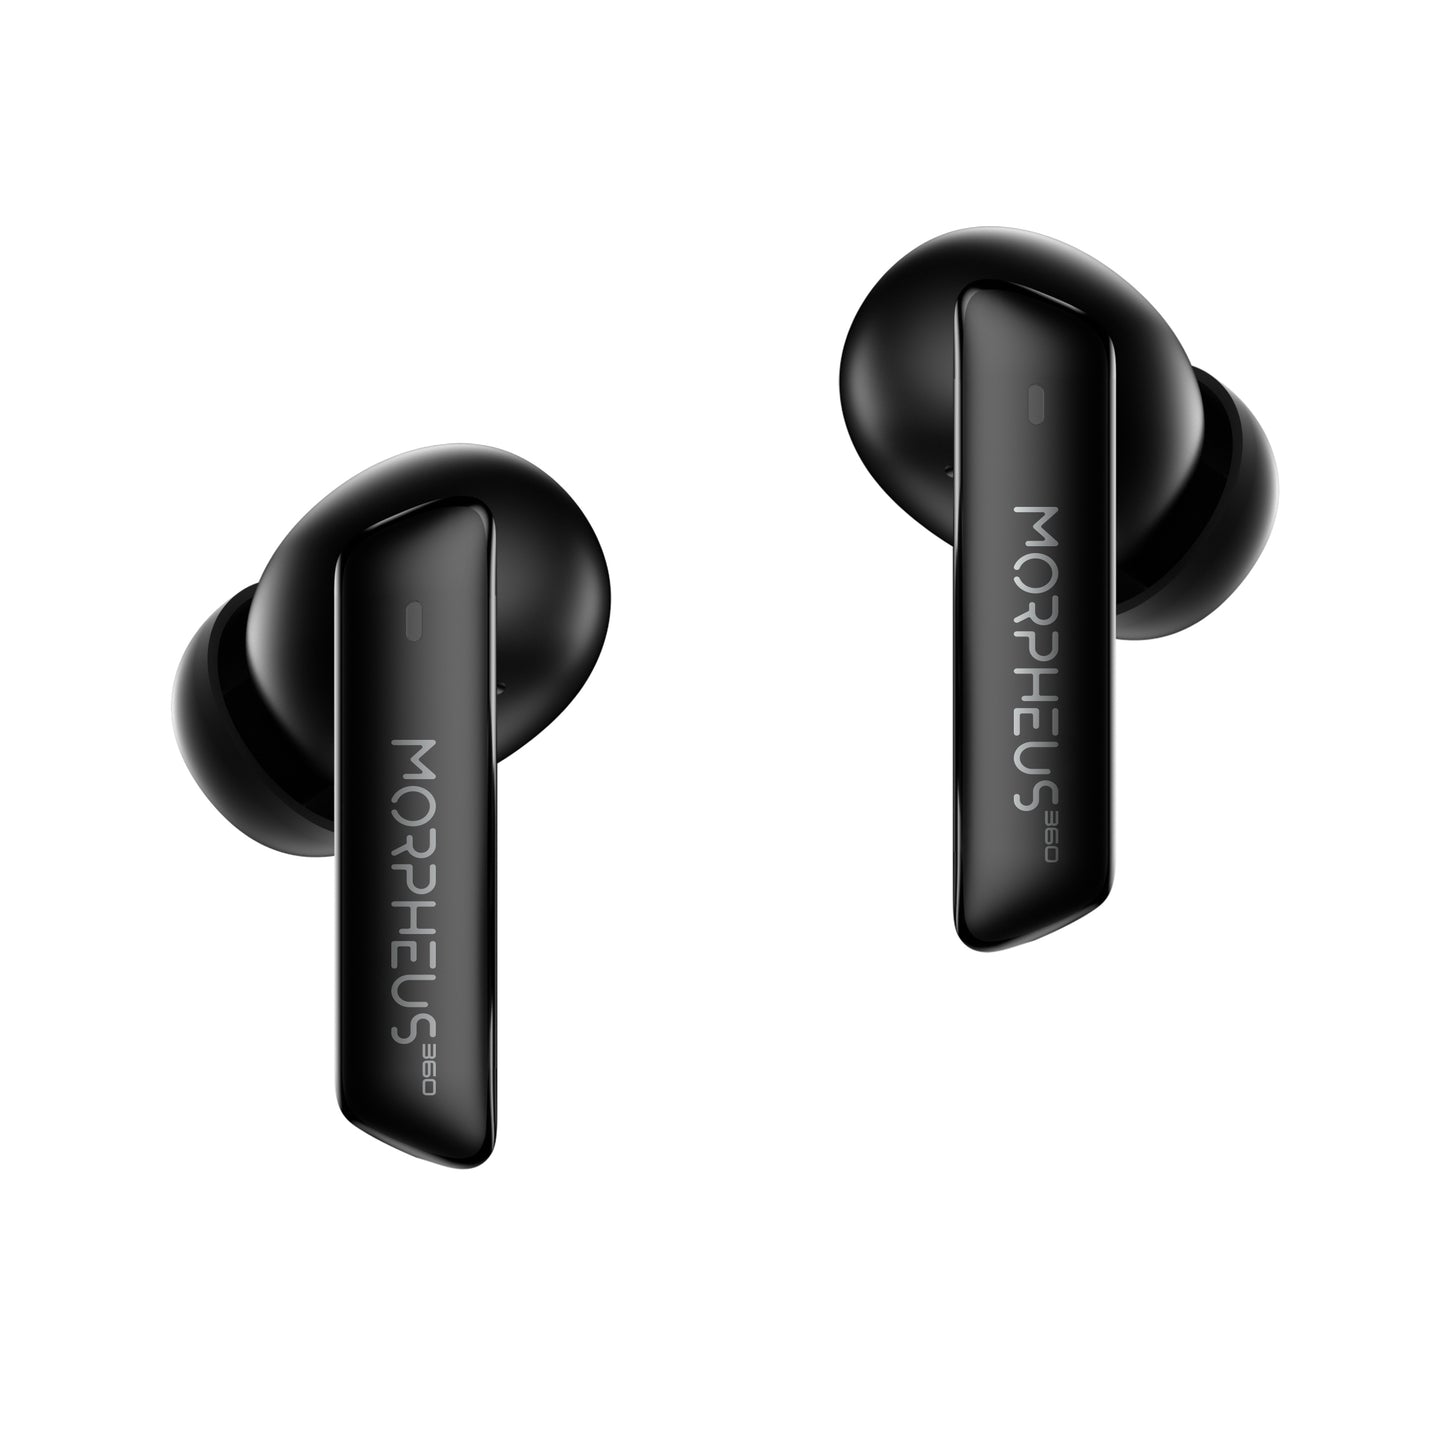 Photo of Morpheus 360 Pulse ANC True Wireless Earbuds, black left and right stick earbuds